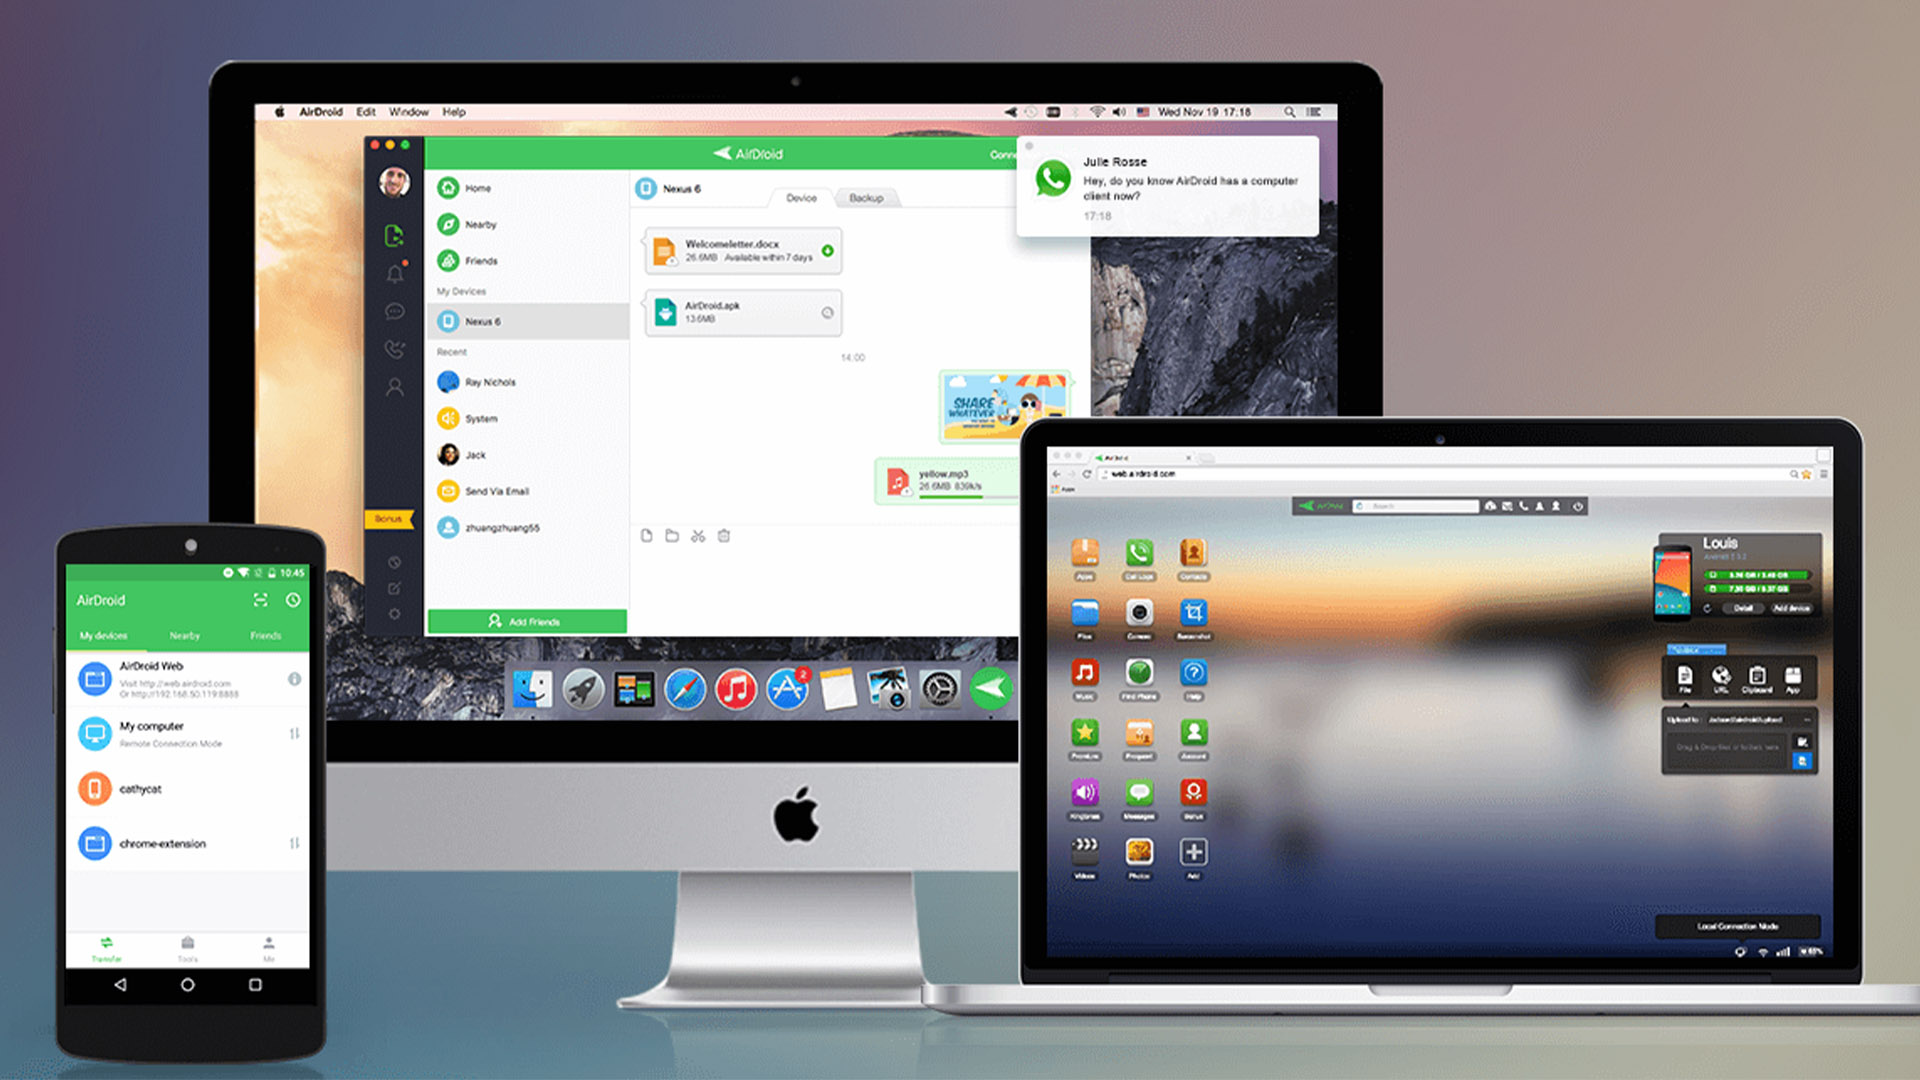 AirDroid best Android apps to transfer files from Android to PC